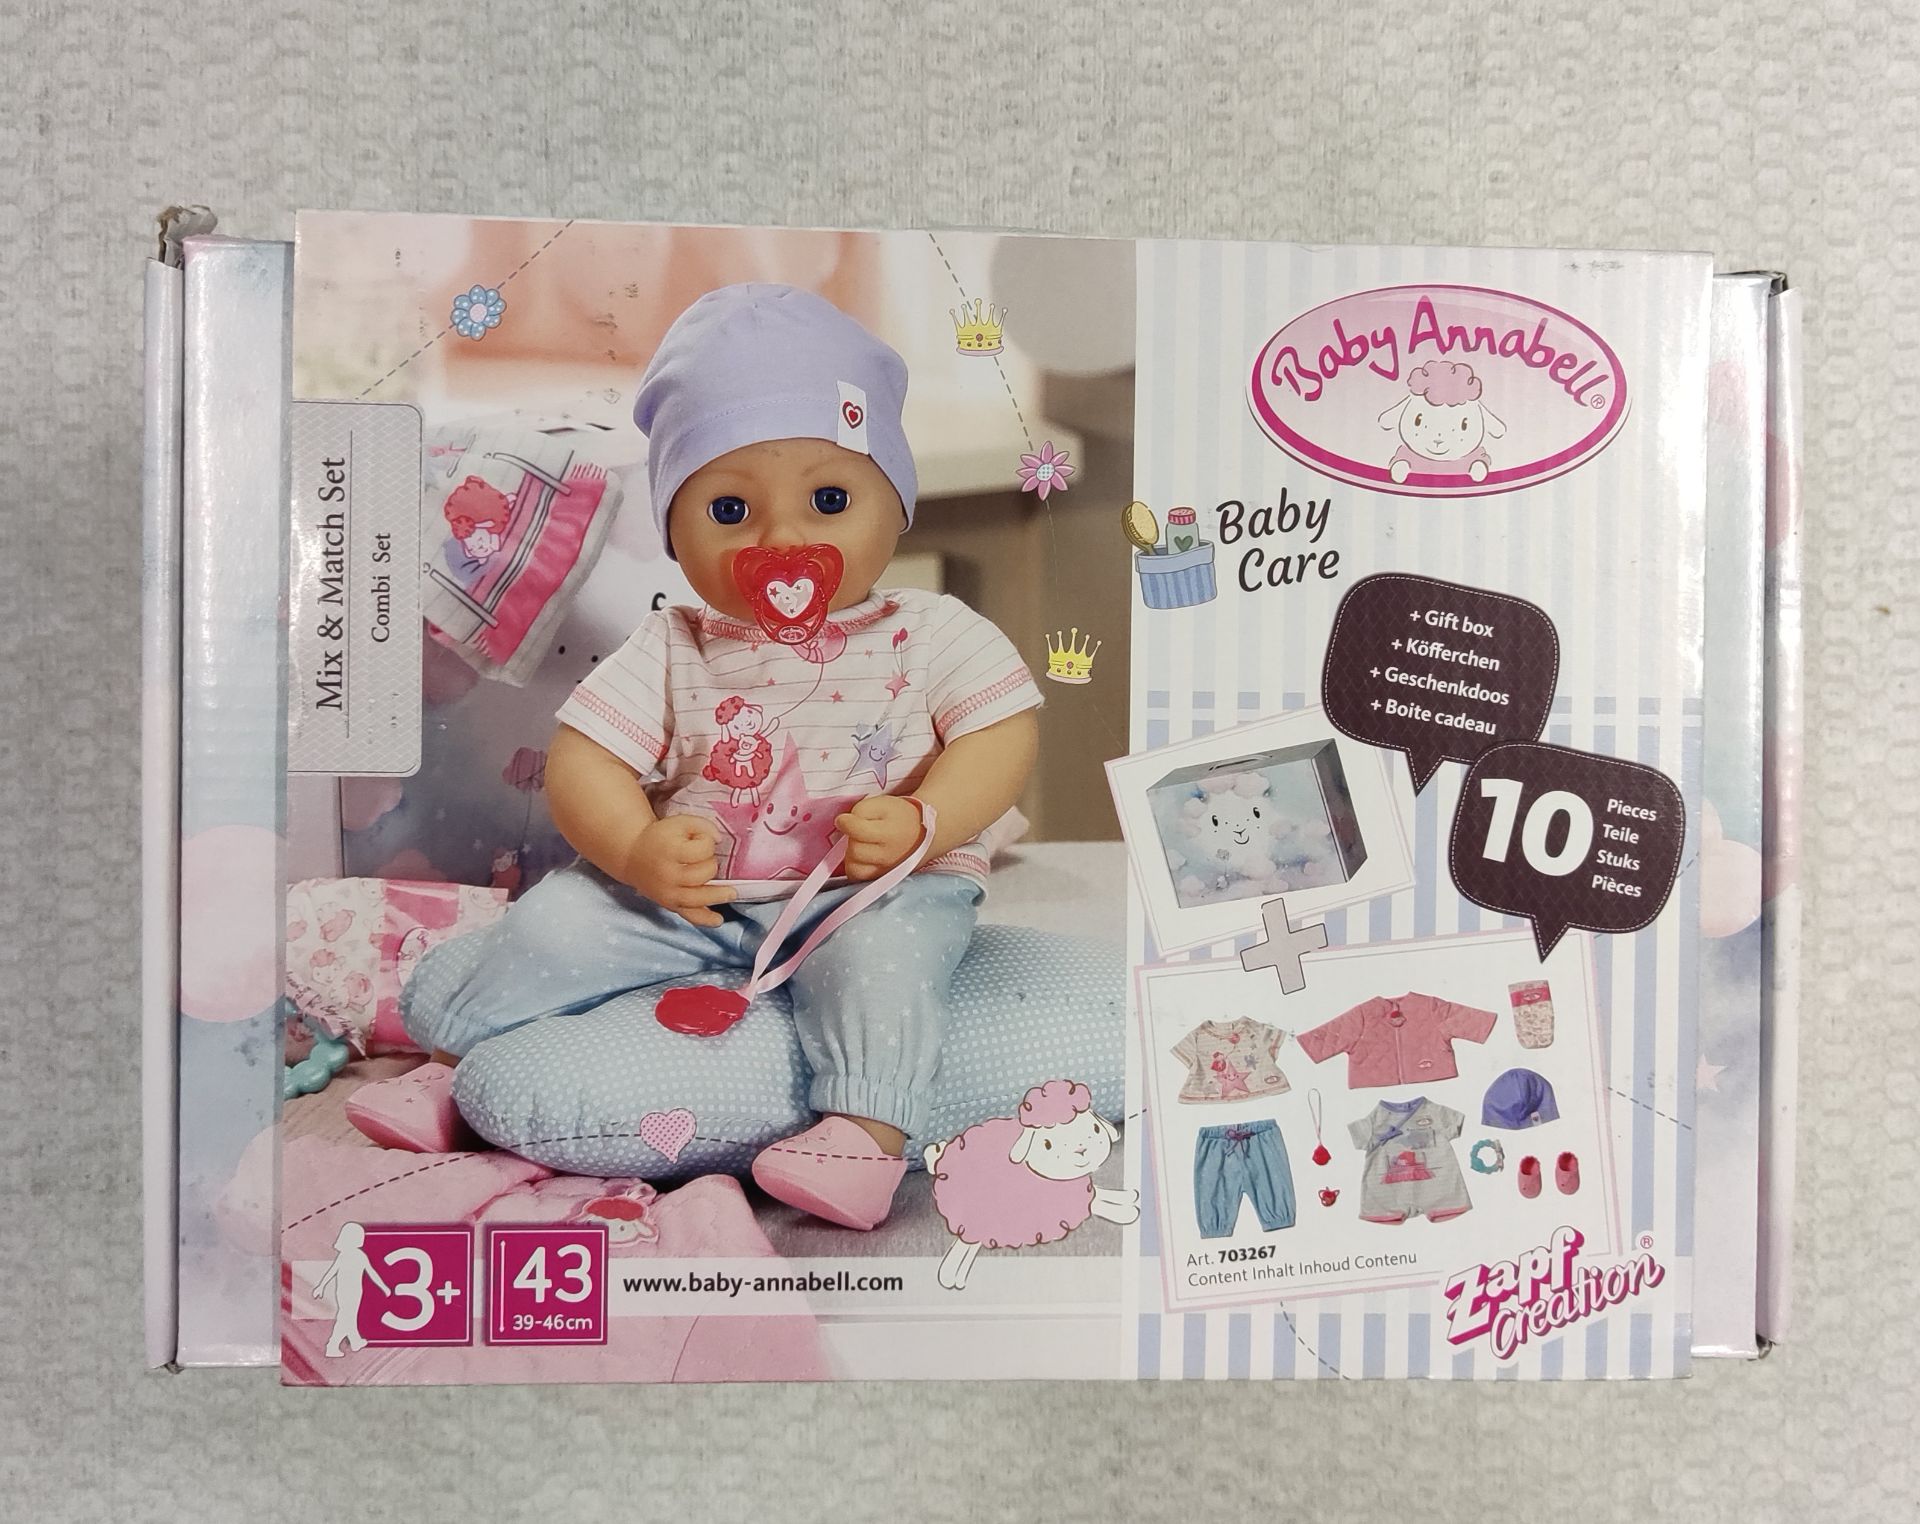 1 x Baby Annabell Mix & Match Combi Set - New/Boxed - Image 3 of 7